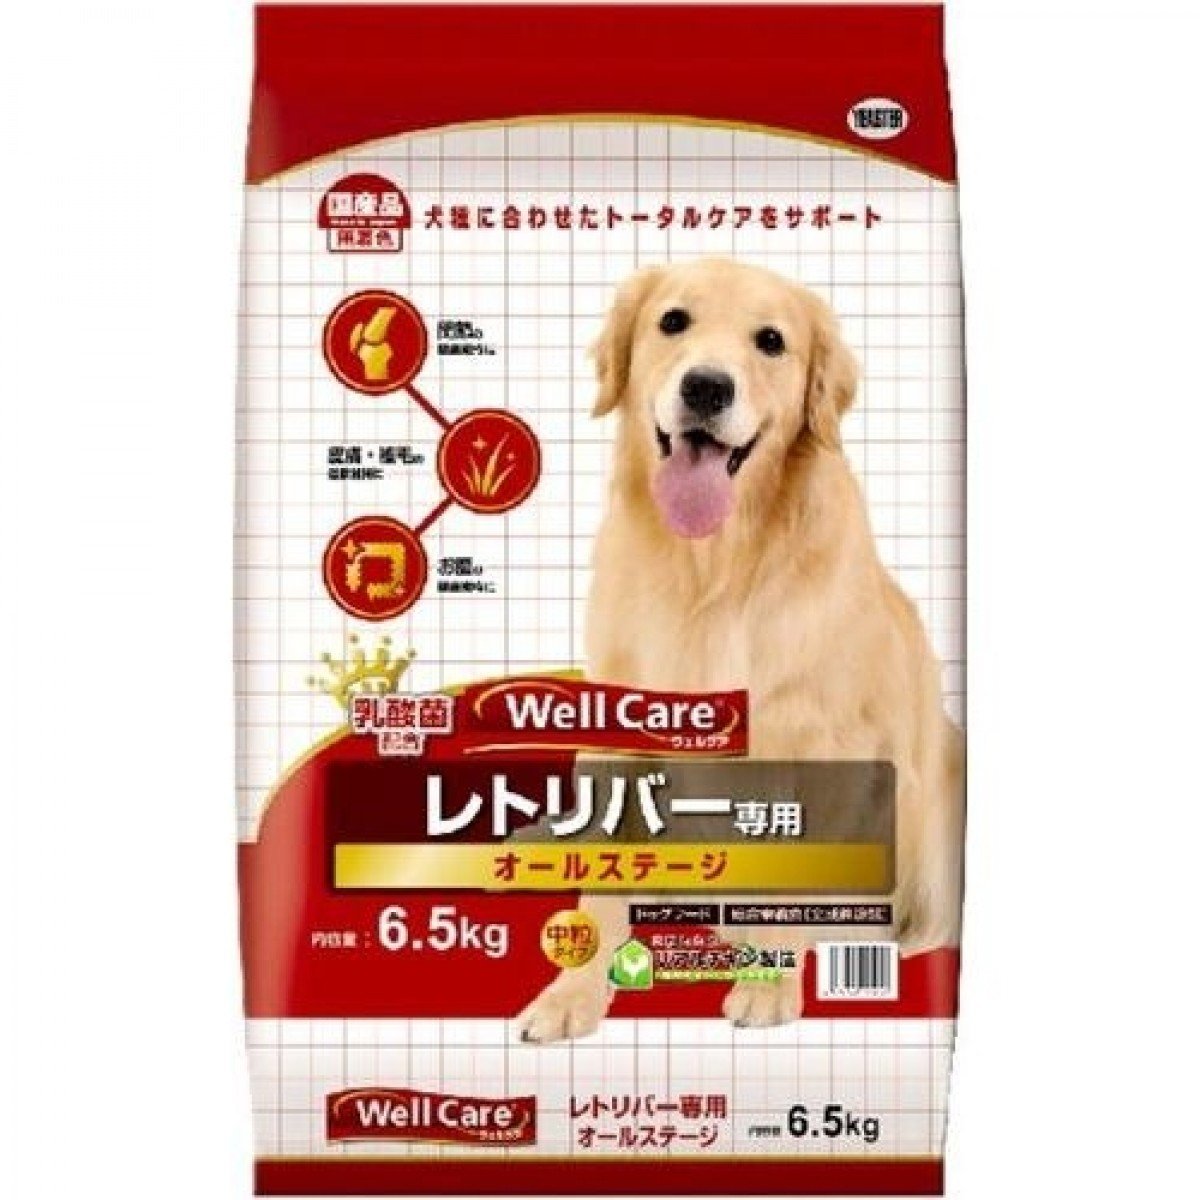 Well Care Golden Retriever Dry Dog Food for Adult Dogs